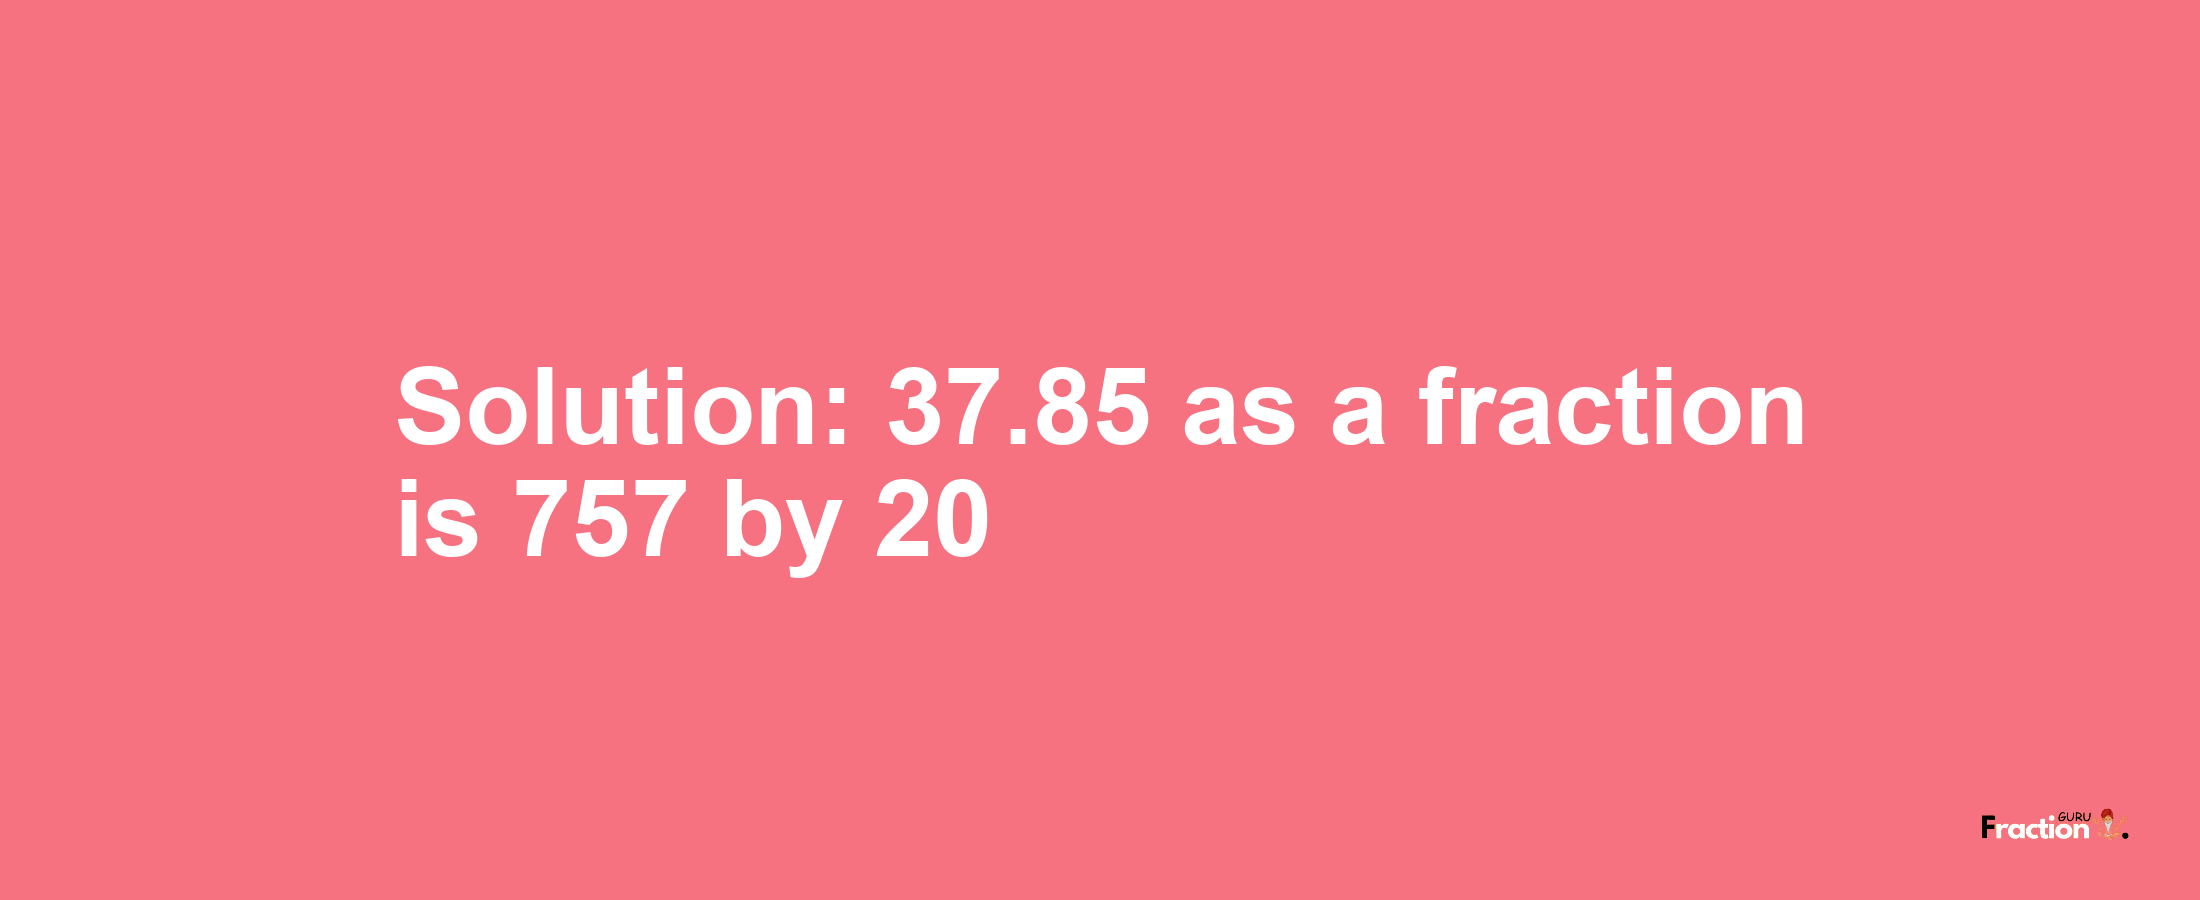 Solution:37.85 as a fraction is 757/20